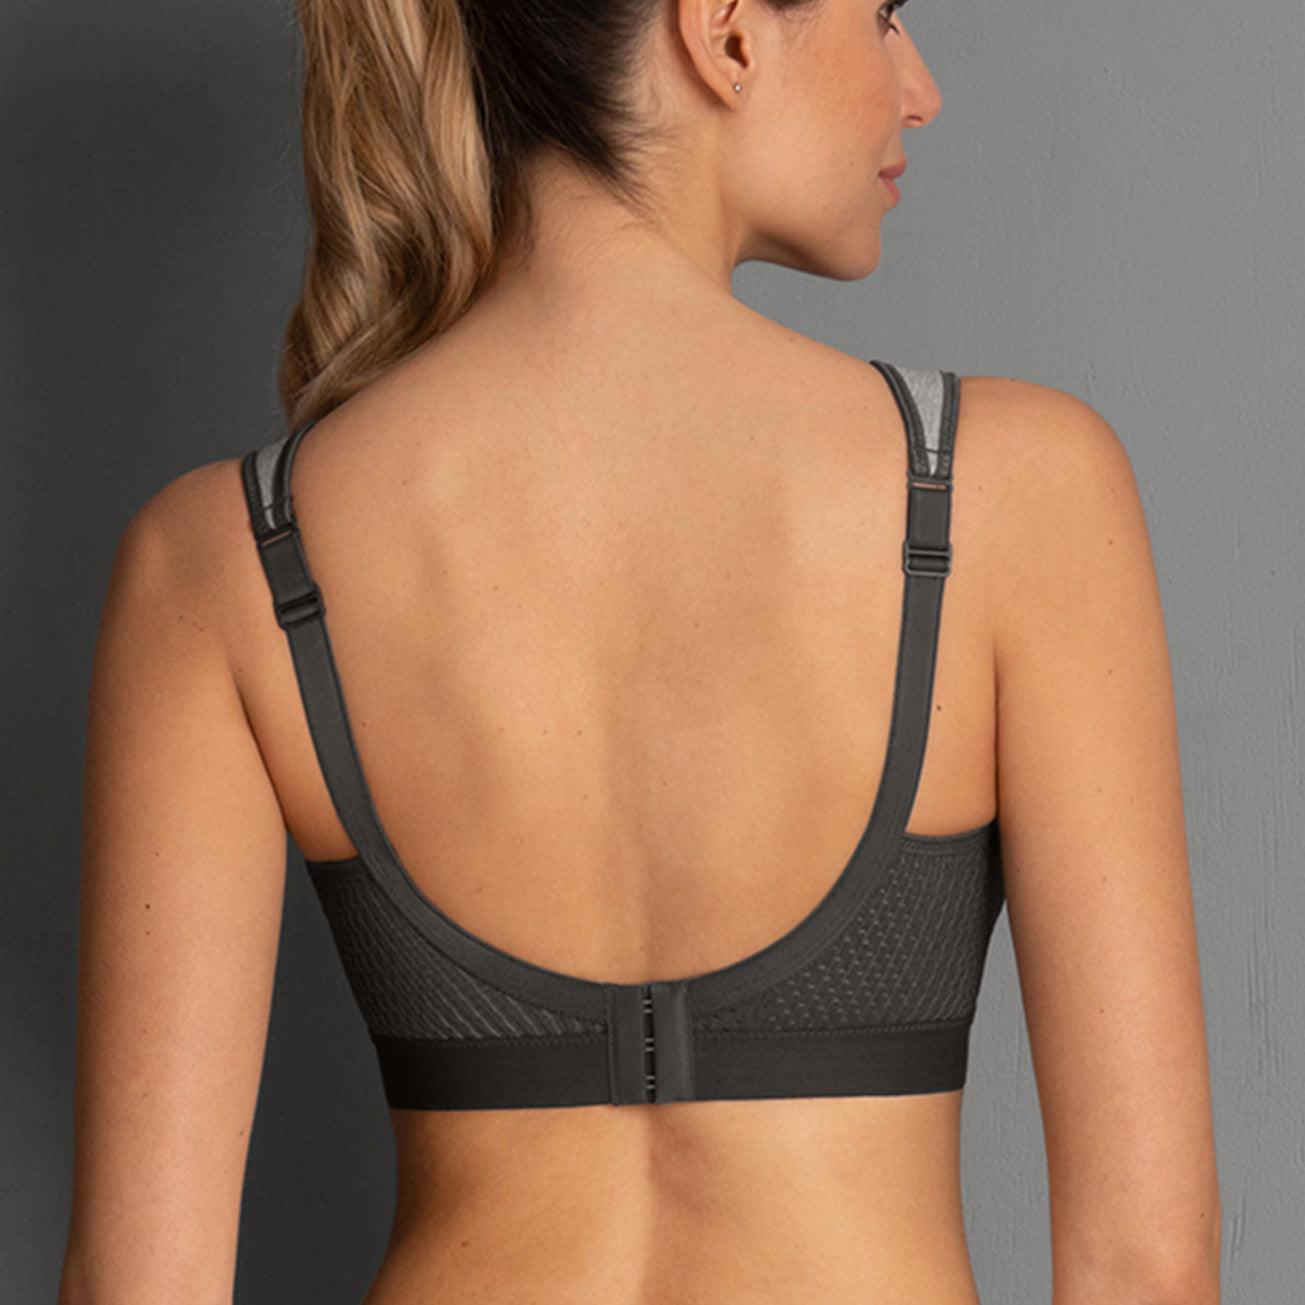 The Anita Maximum Support and Extreme Control Wire Free Sports Bra